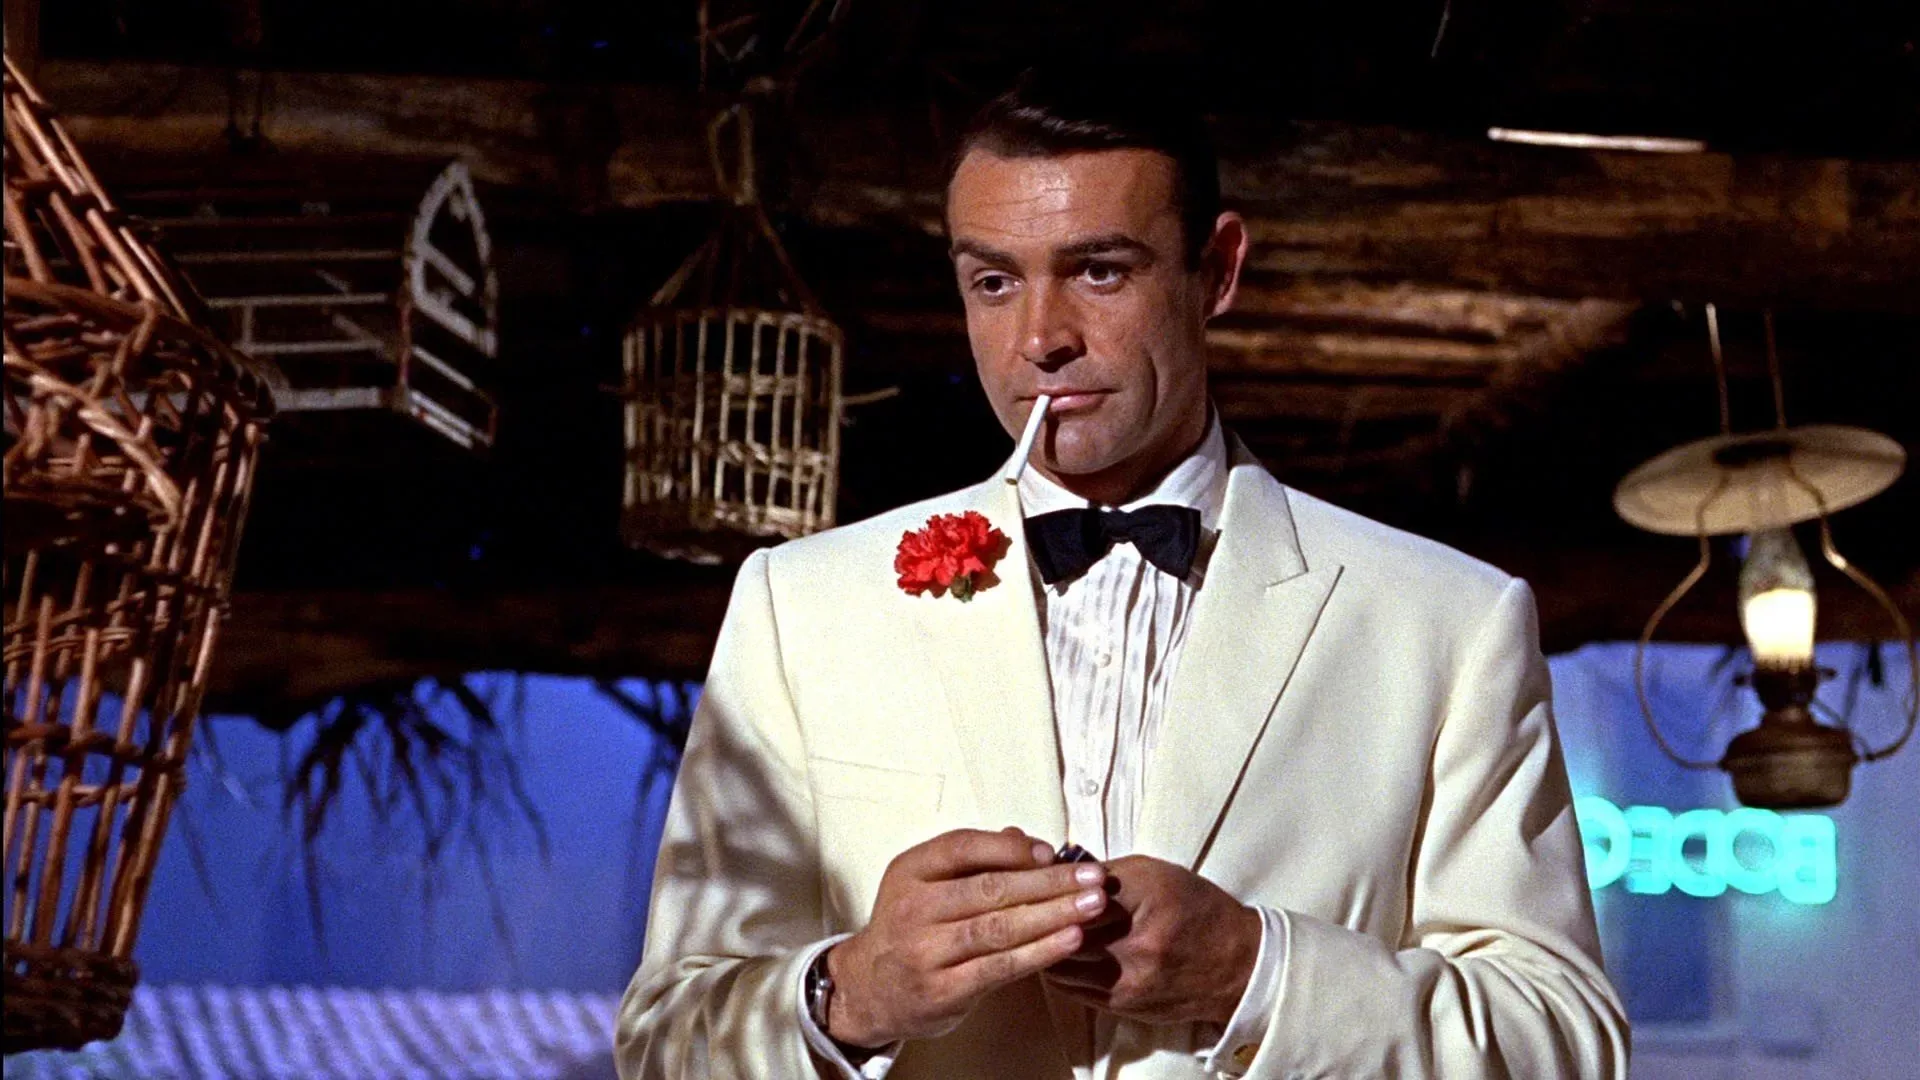 Every Sean Connery James Bond Movie, Ranked From Worst to Best